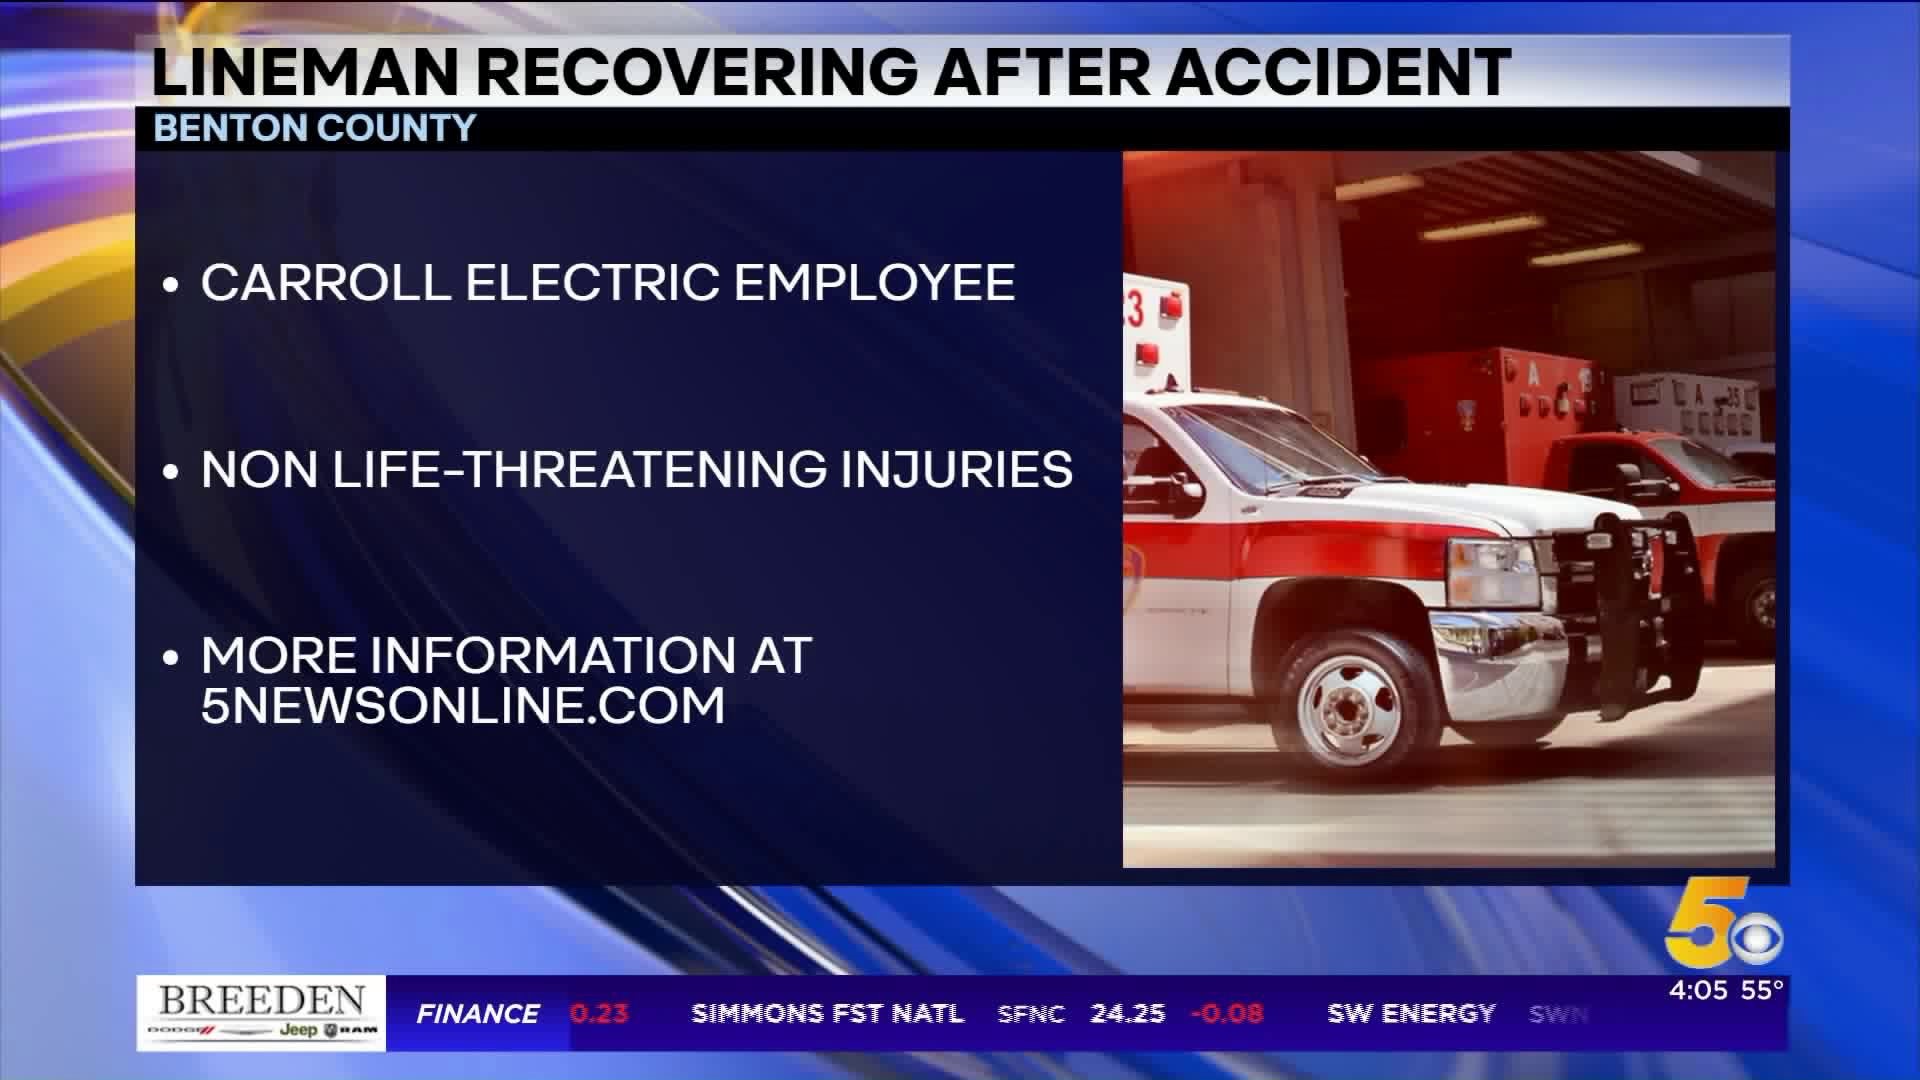 Carroll Electric Lineman Recovering After Accident